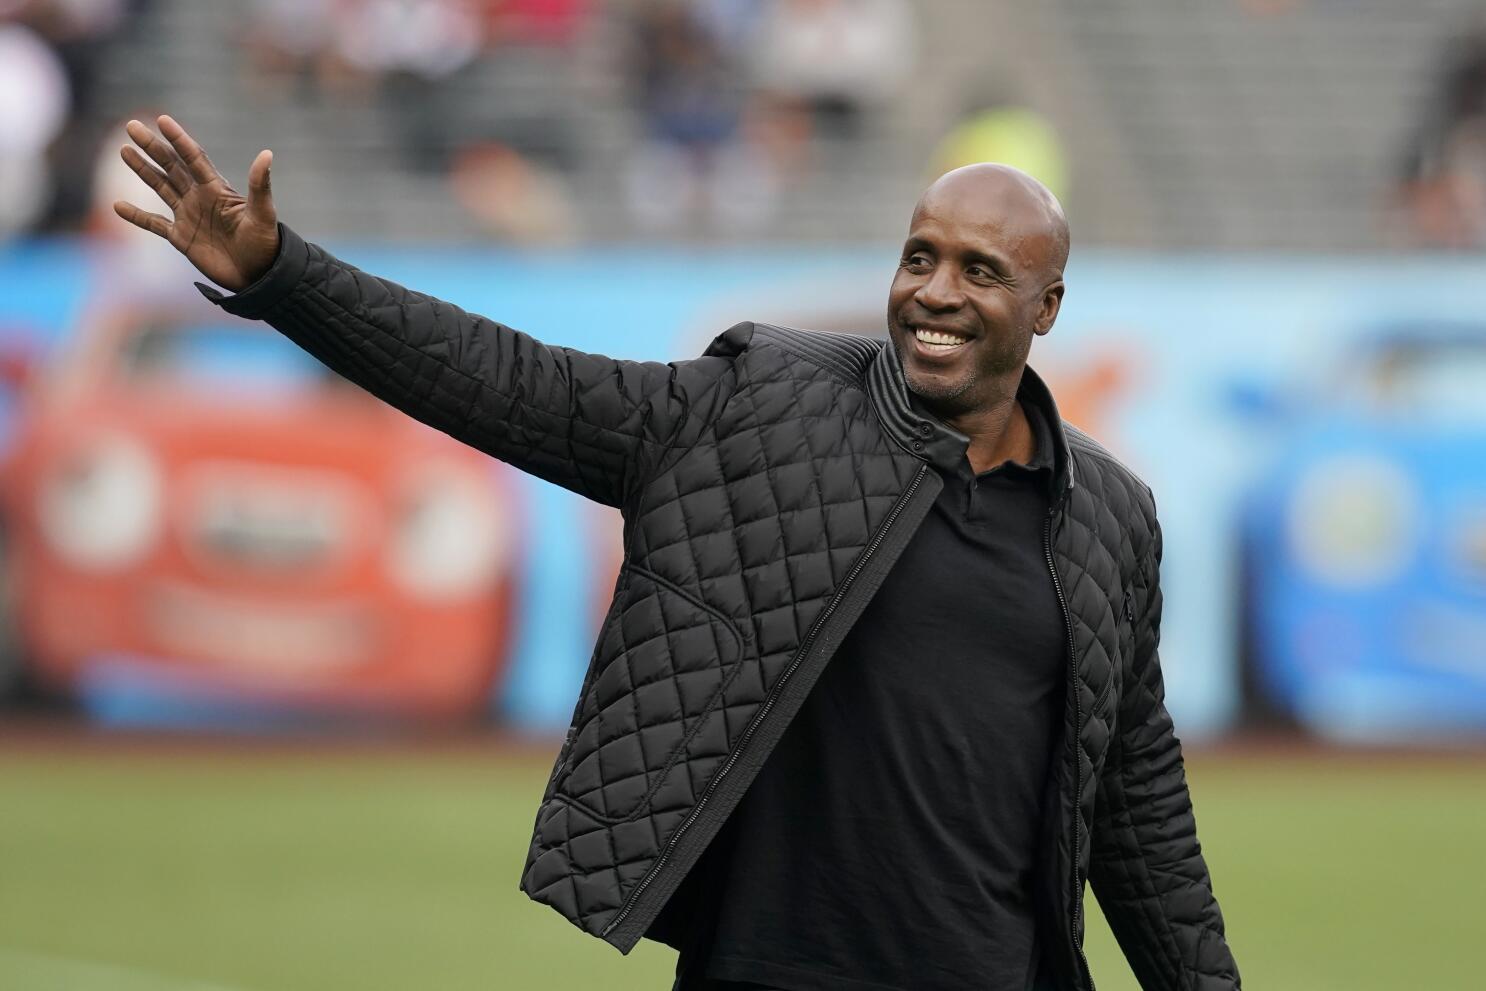 Barry Bonds, Roger Clemens Hall of Fame decision coming - Los